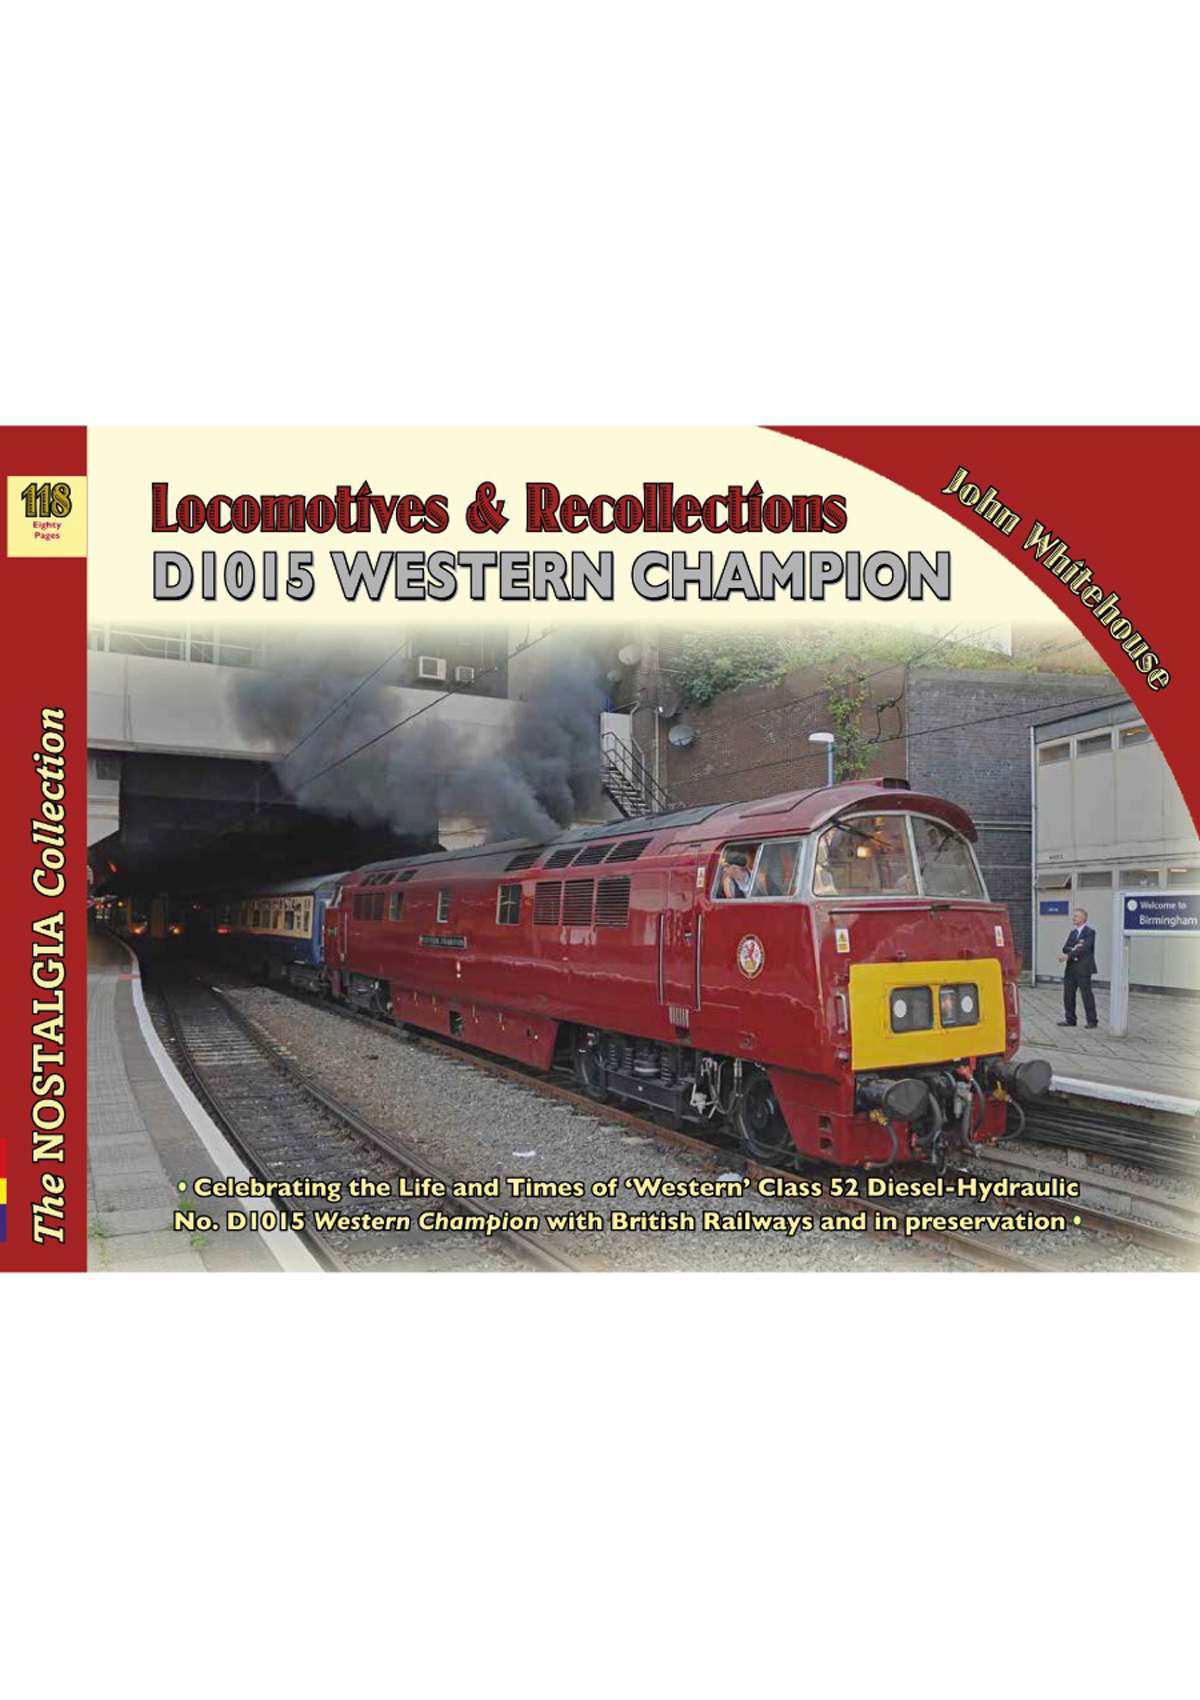 Locomotives & Recollections No D1015 Western Champion.